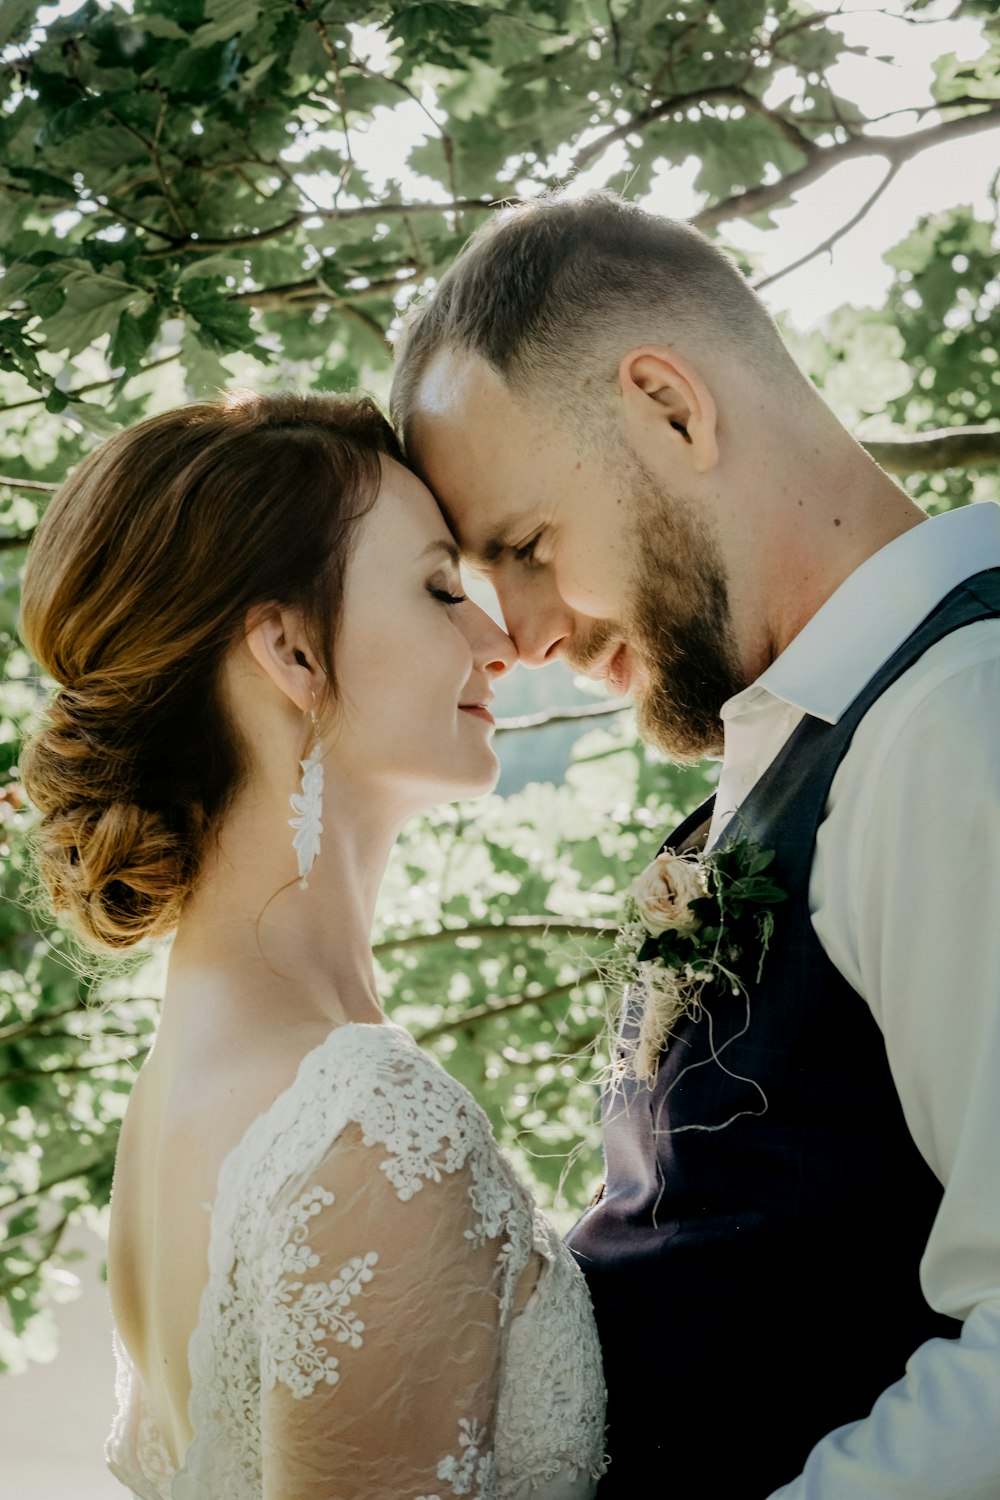 man in black suit kissing woman in white floral lace wedding dress